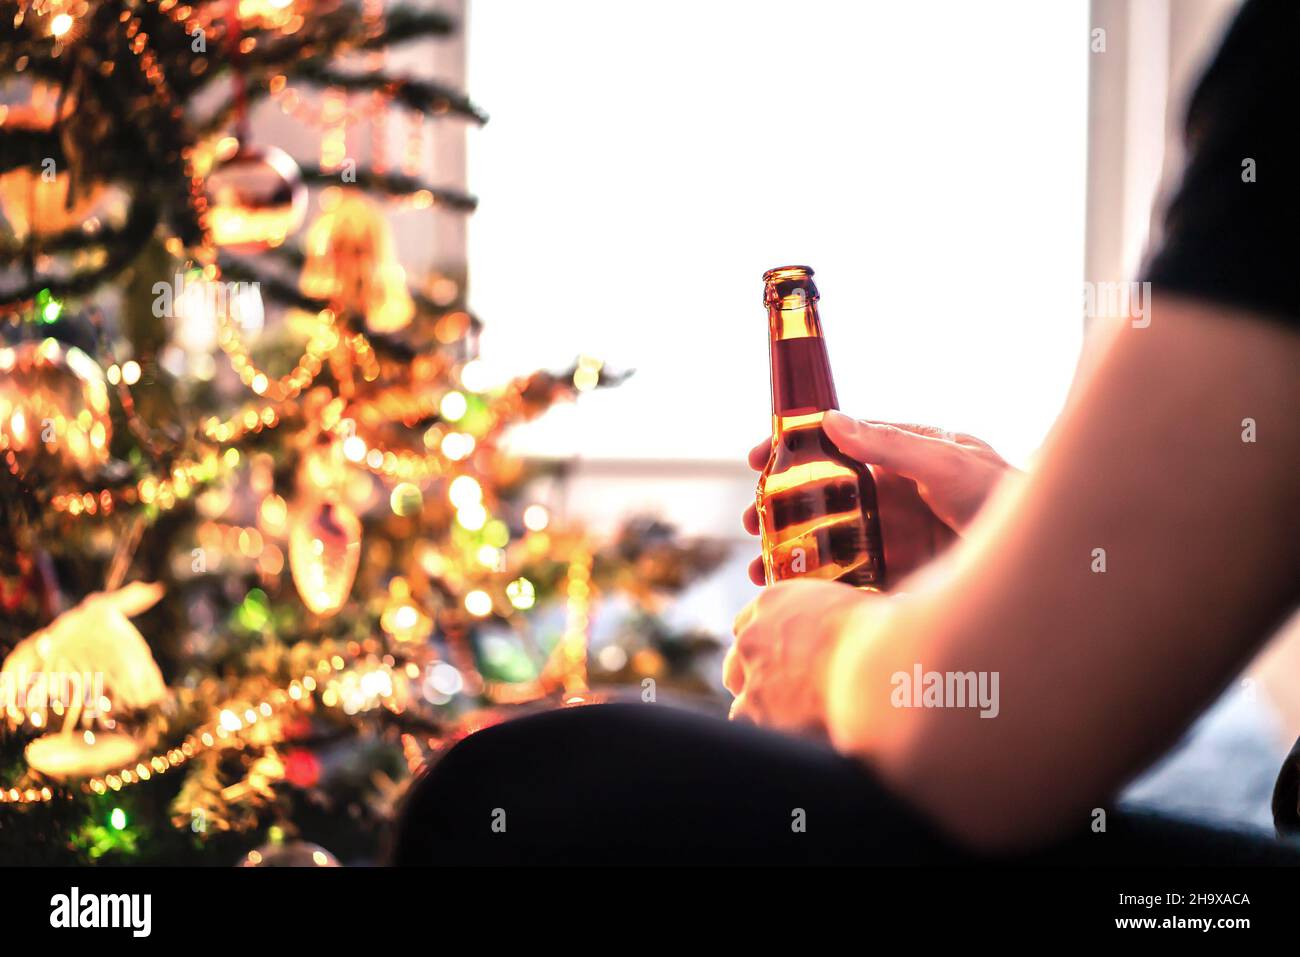 Christmas with alcohol and beer bottle. New year's party or Xmas celebration. Drinking problem or alcoholism concept. Craft lager, pilsner or pale ale. Stock Photo